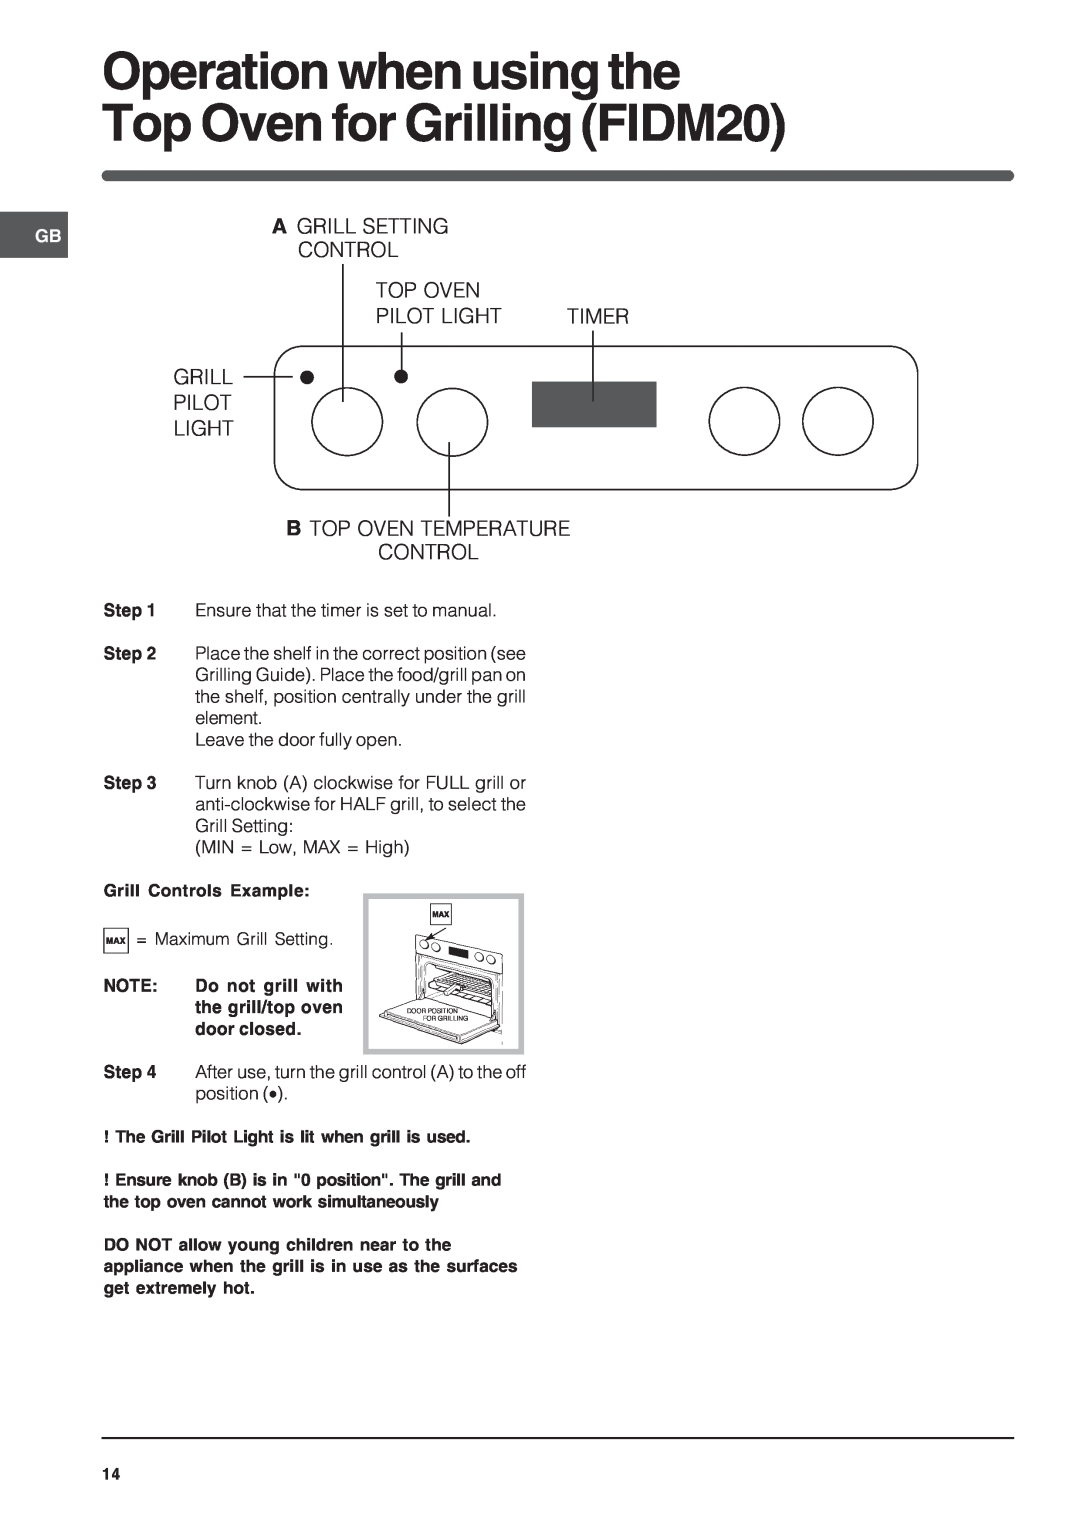 Indesit FIDM20IX/1 Operation when using the, Top Oven for Grilling FIDM20, A Grill Setting, Control, Pilot Light, Timer 